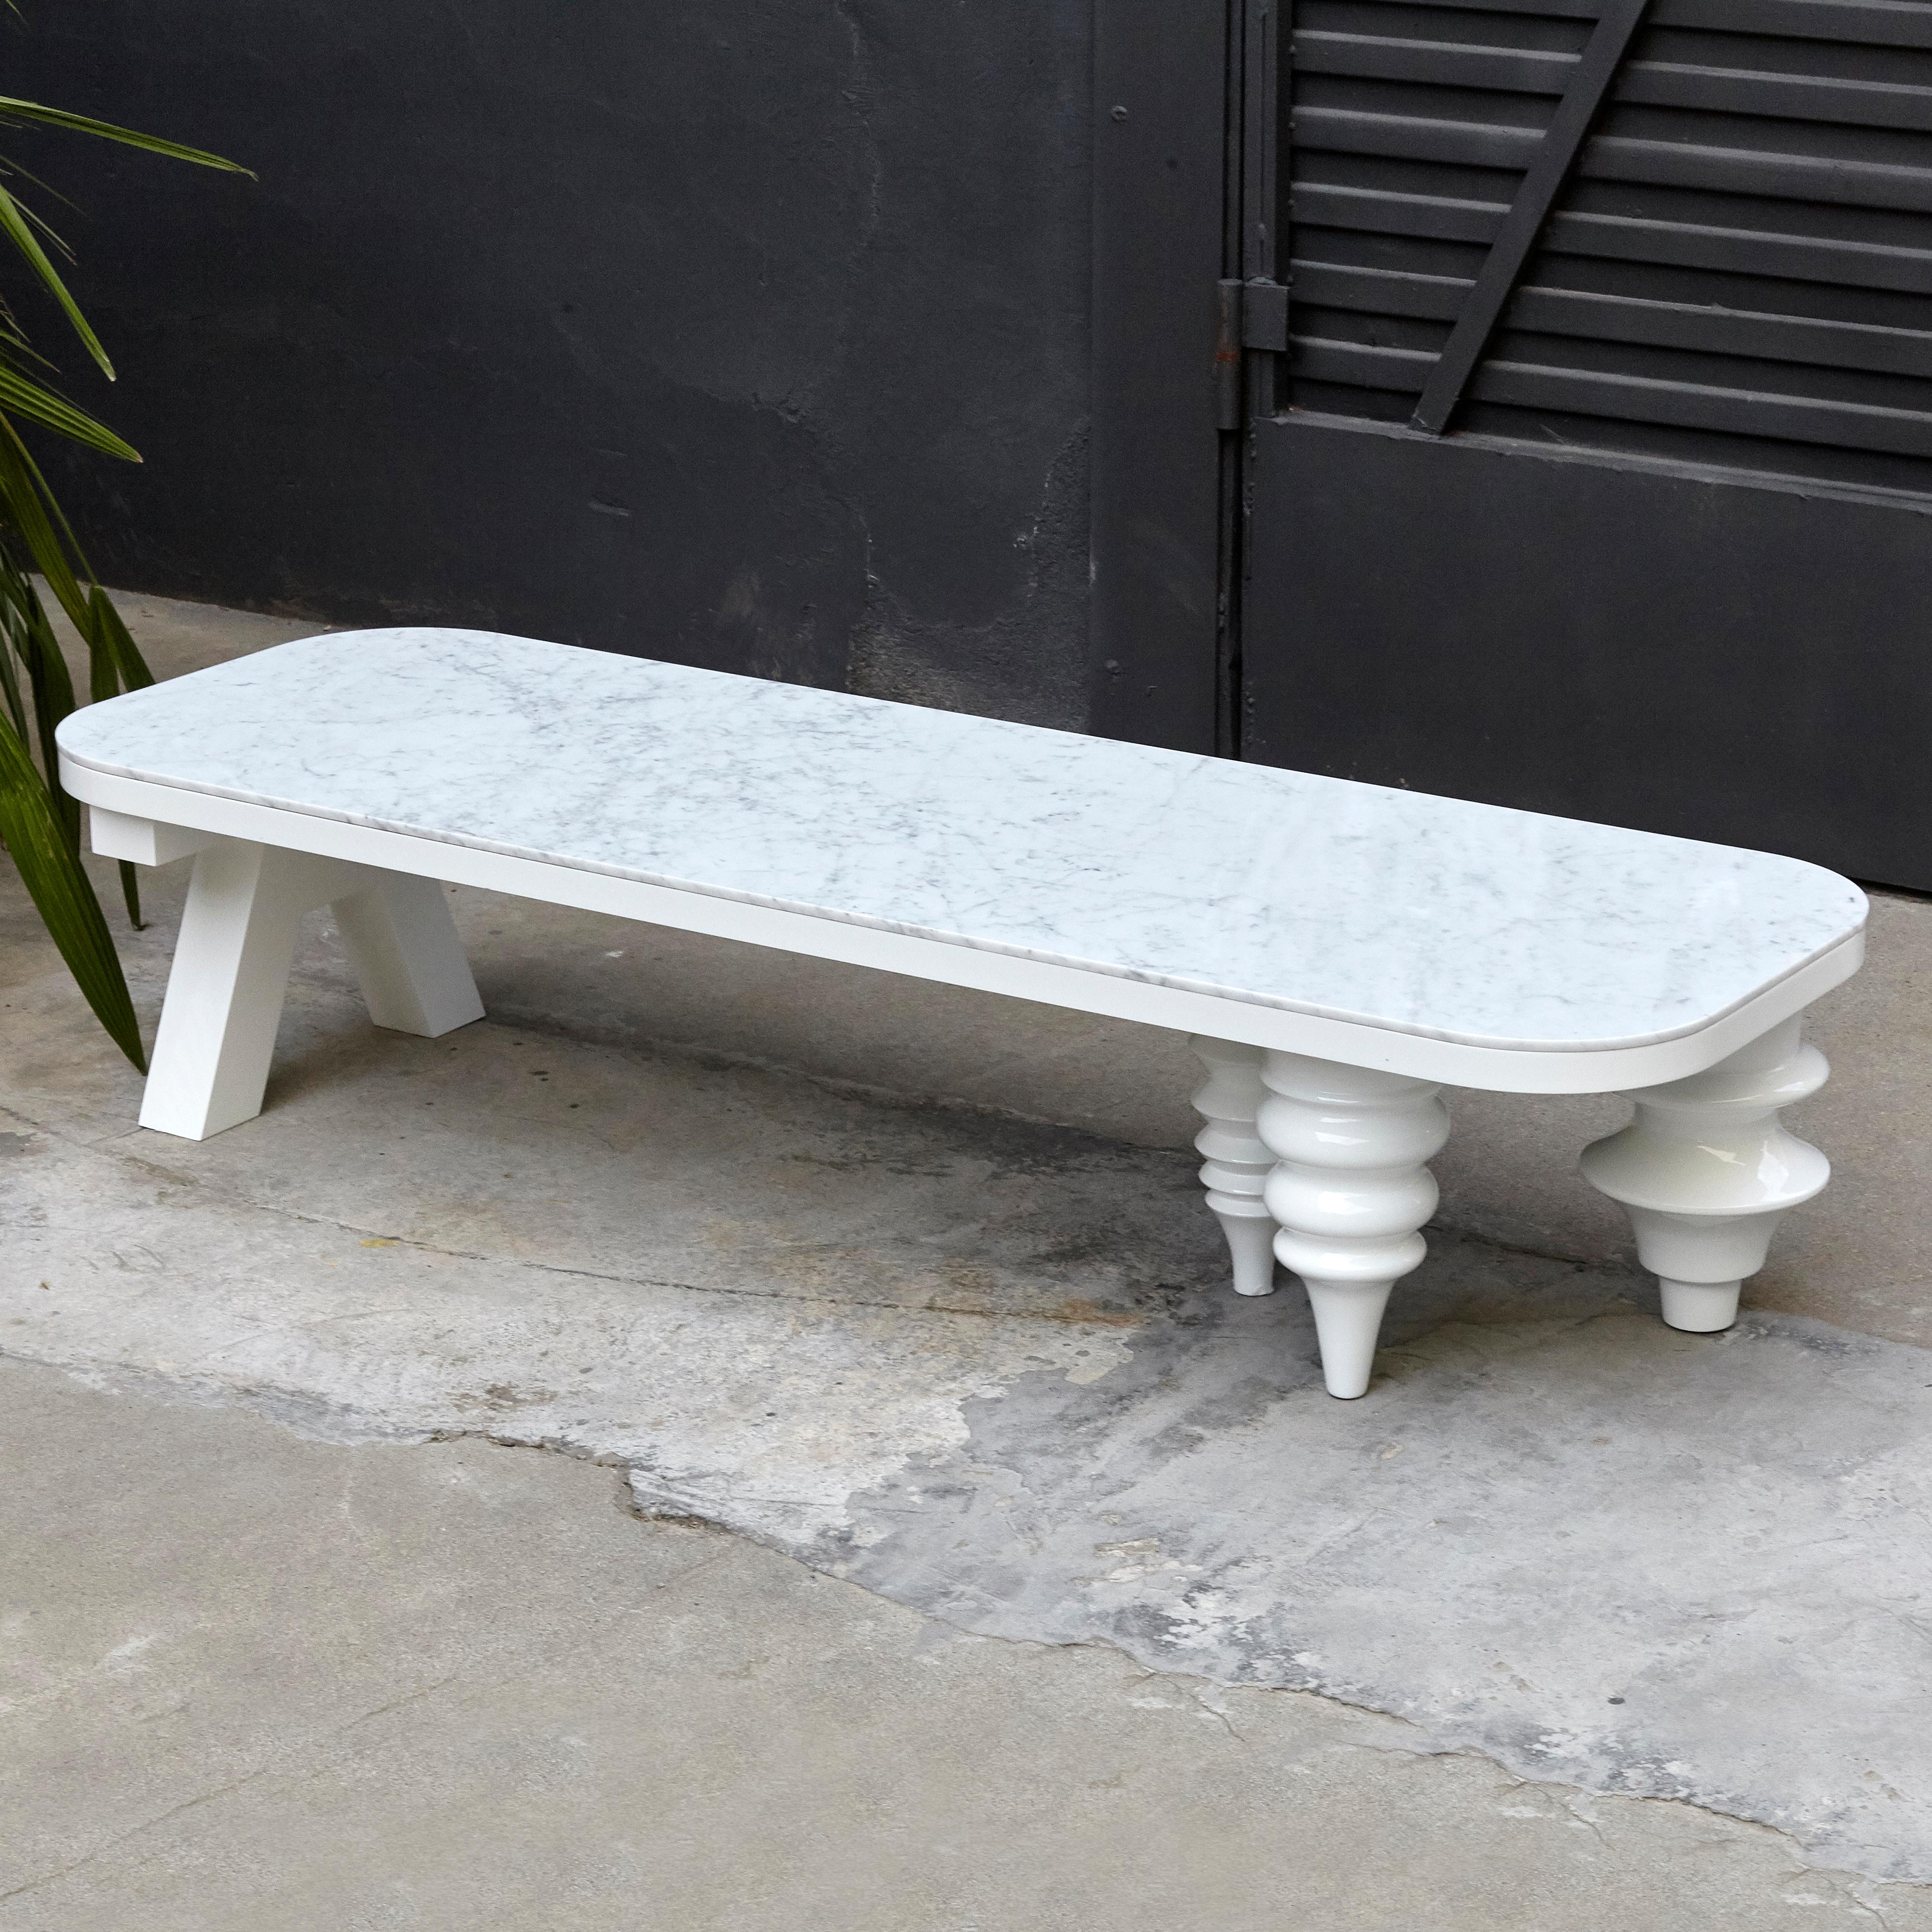 Design by Jaime Hayon, 2016
Manufactured by BD Barcelona.

Low table with rectangular black marble top. The legs have white lacquered finishes.

In original condition, with minor wear consistent with age and use, preserving a beautiful